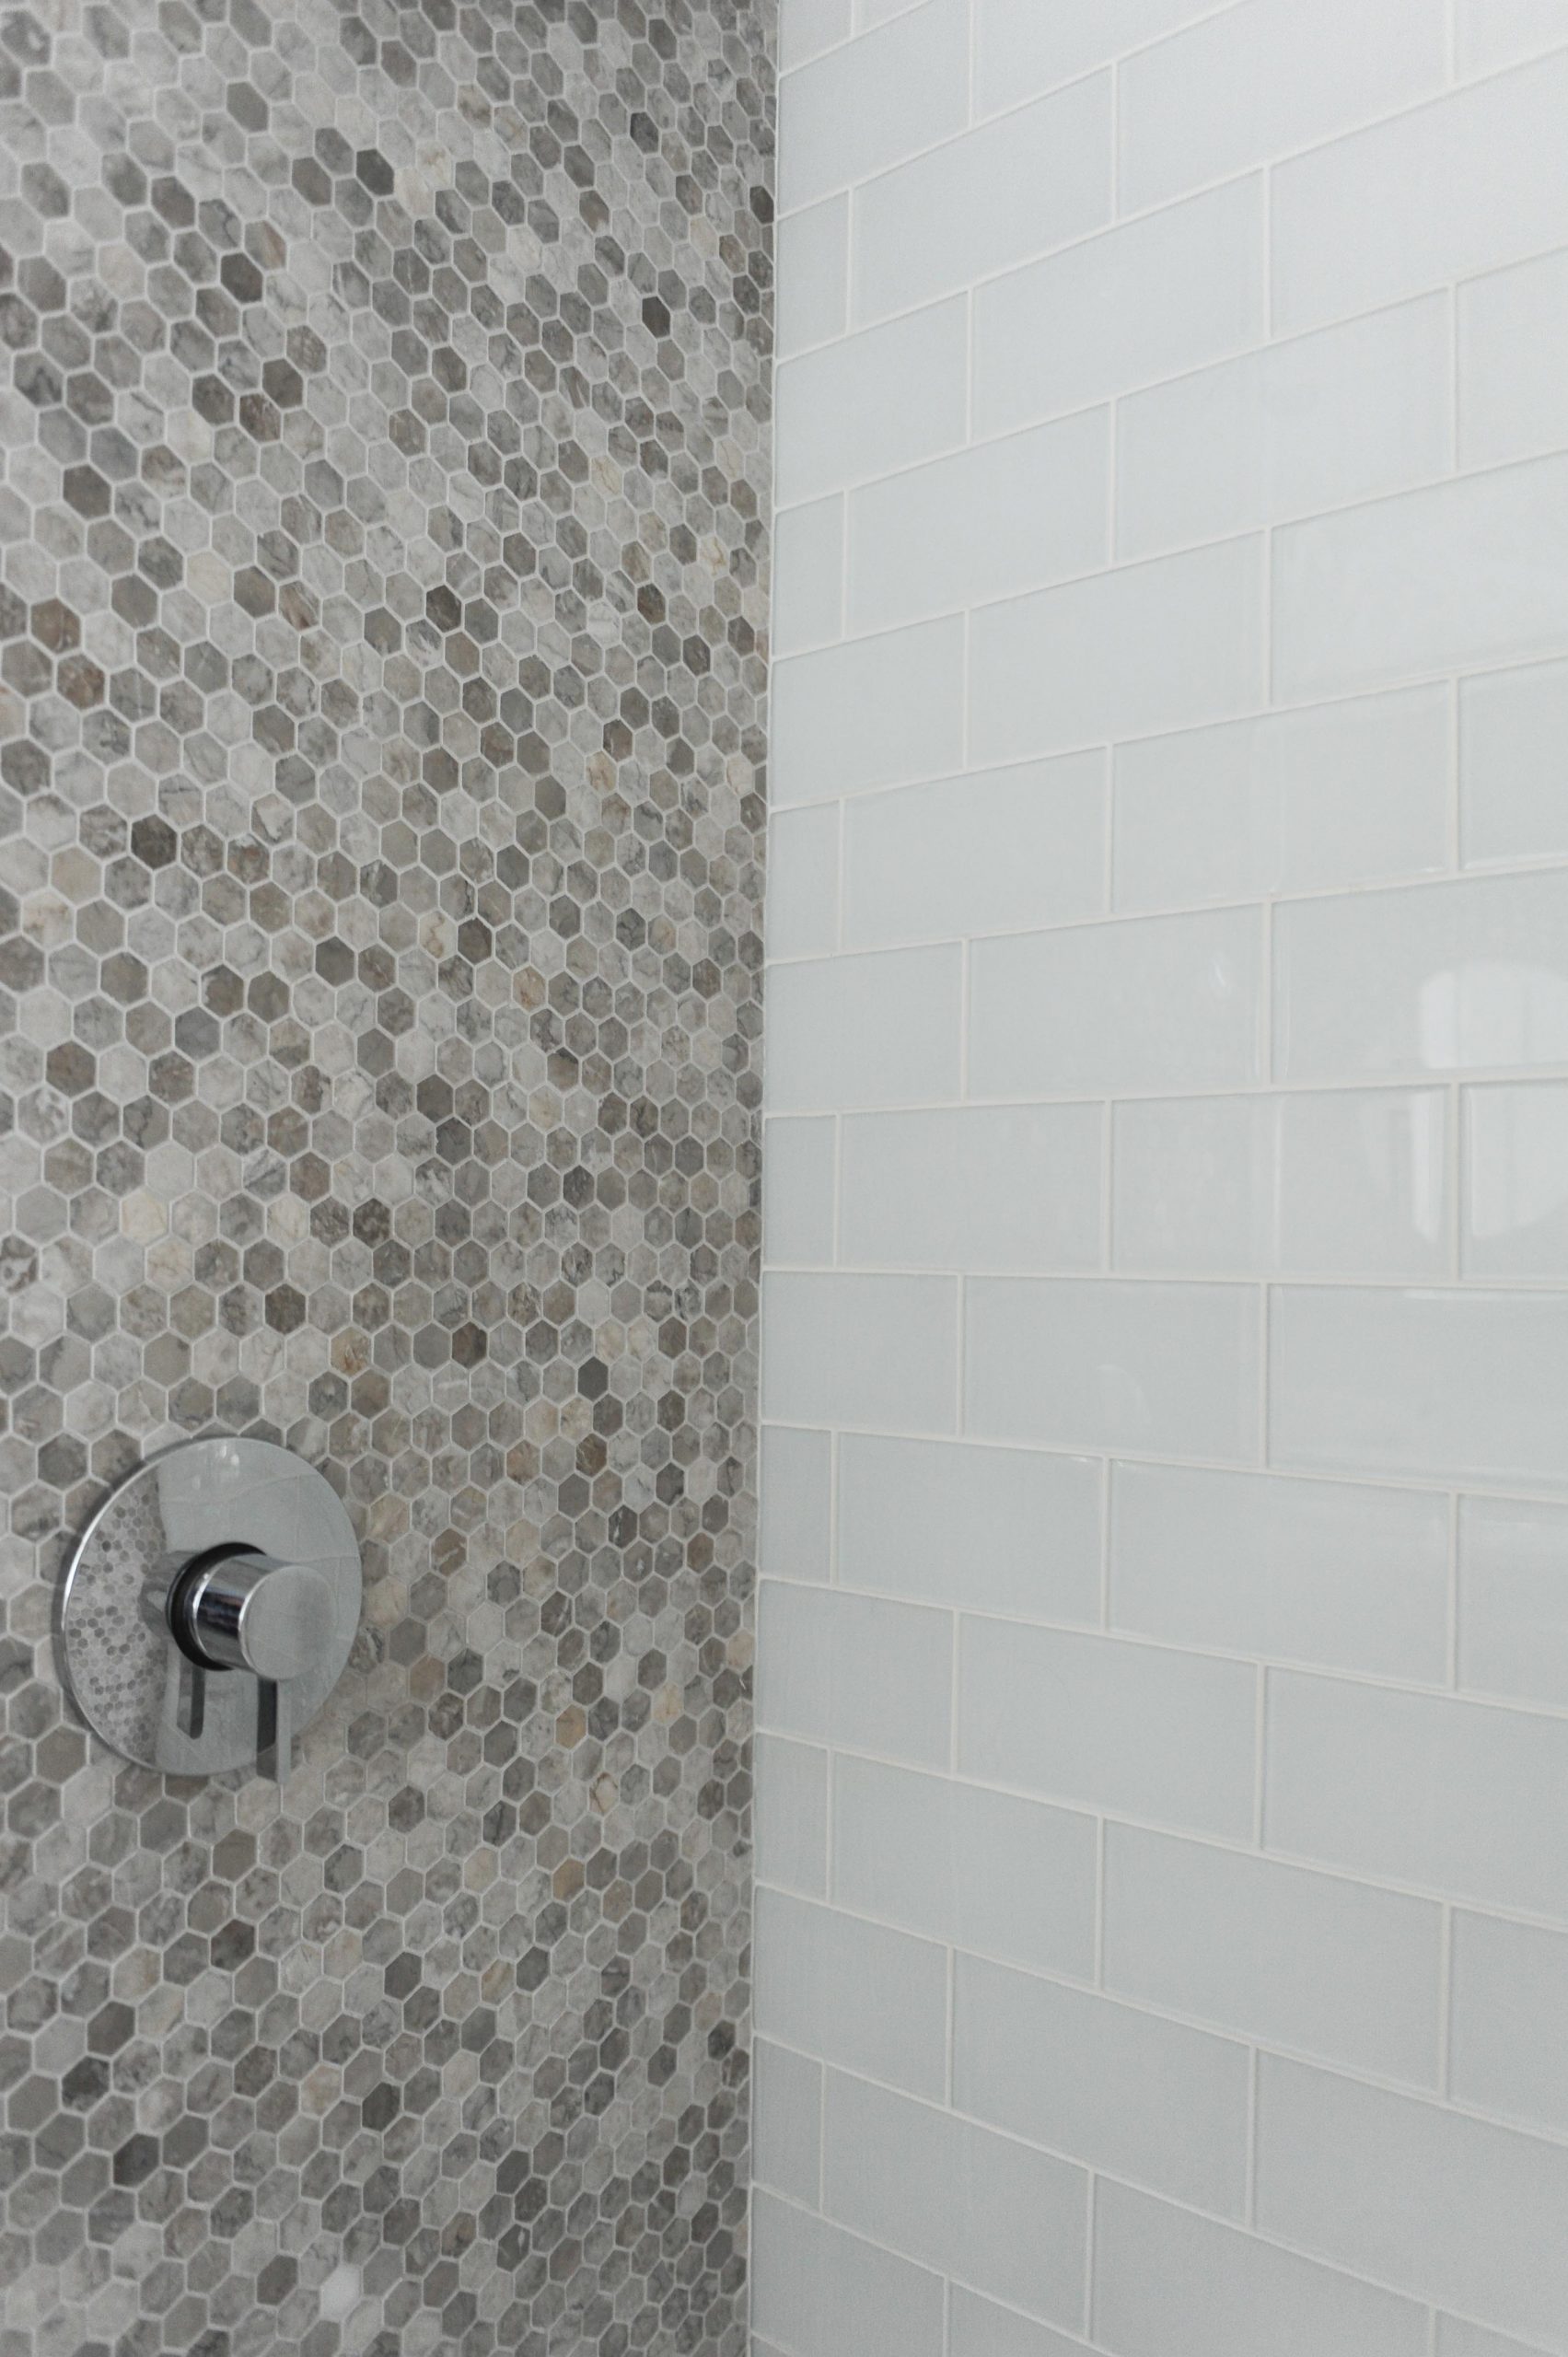 Shower wall clad in marble herringbone and white subway tiles.